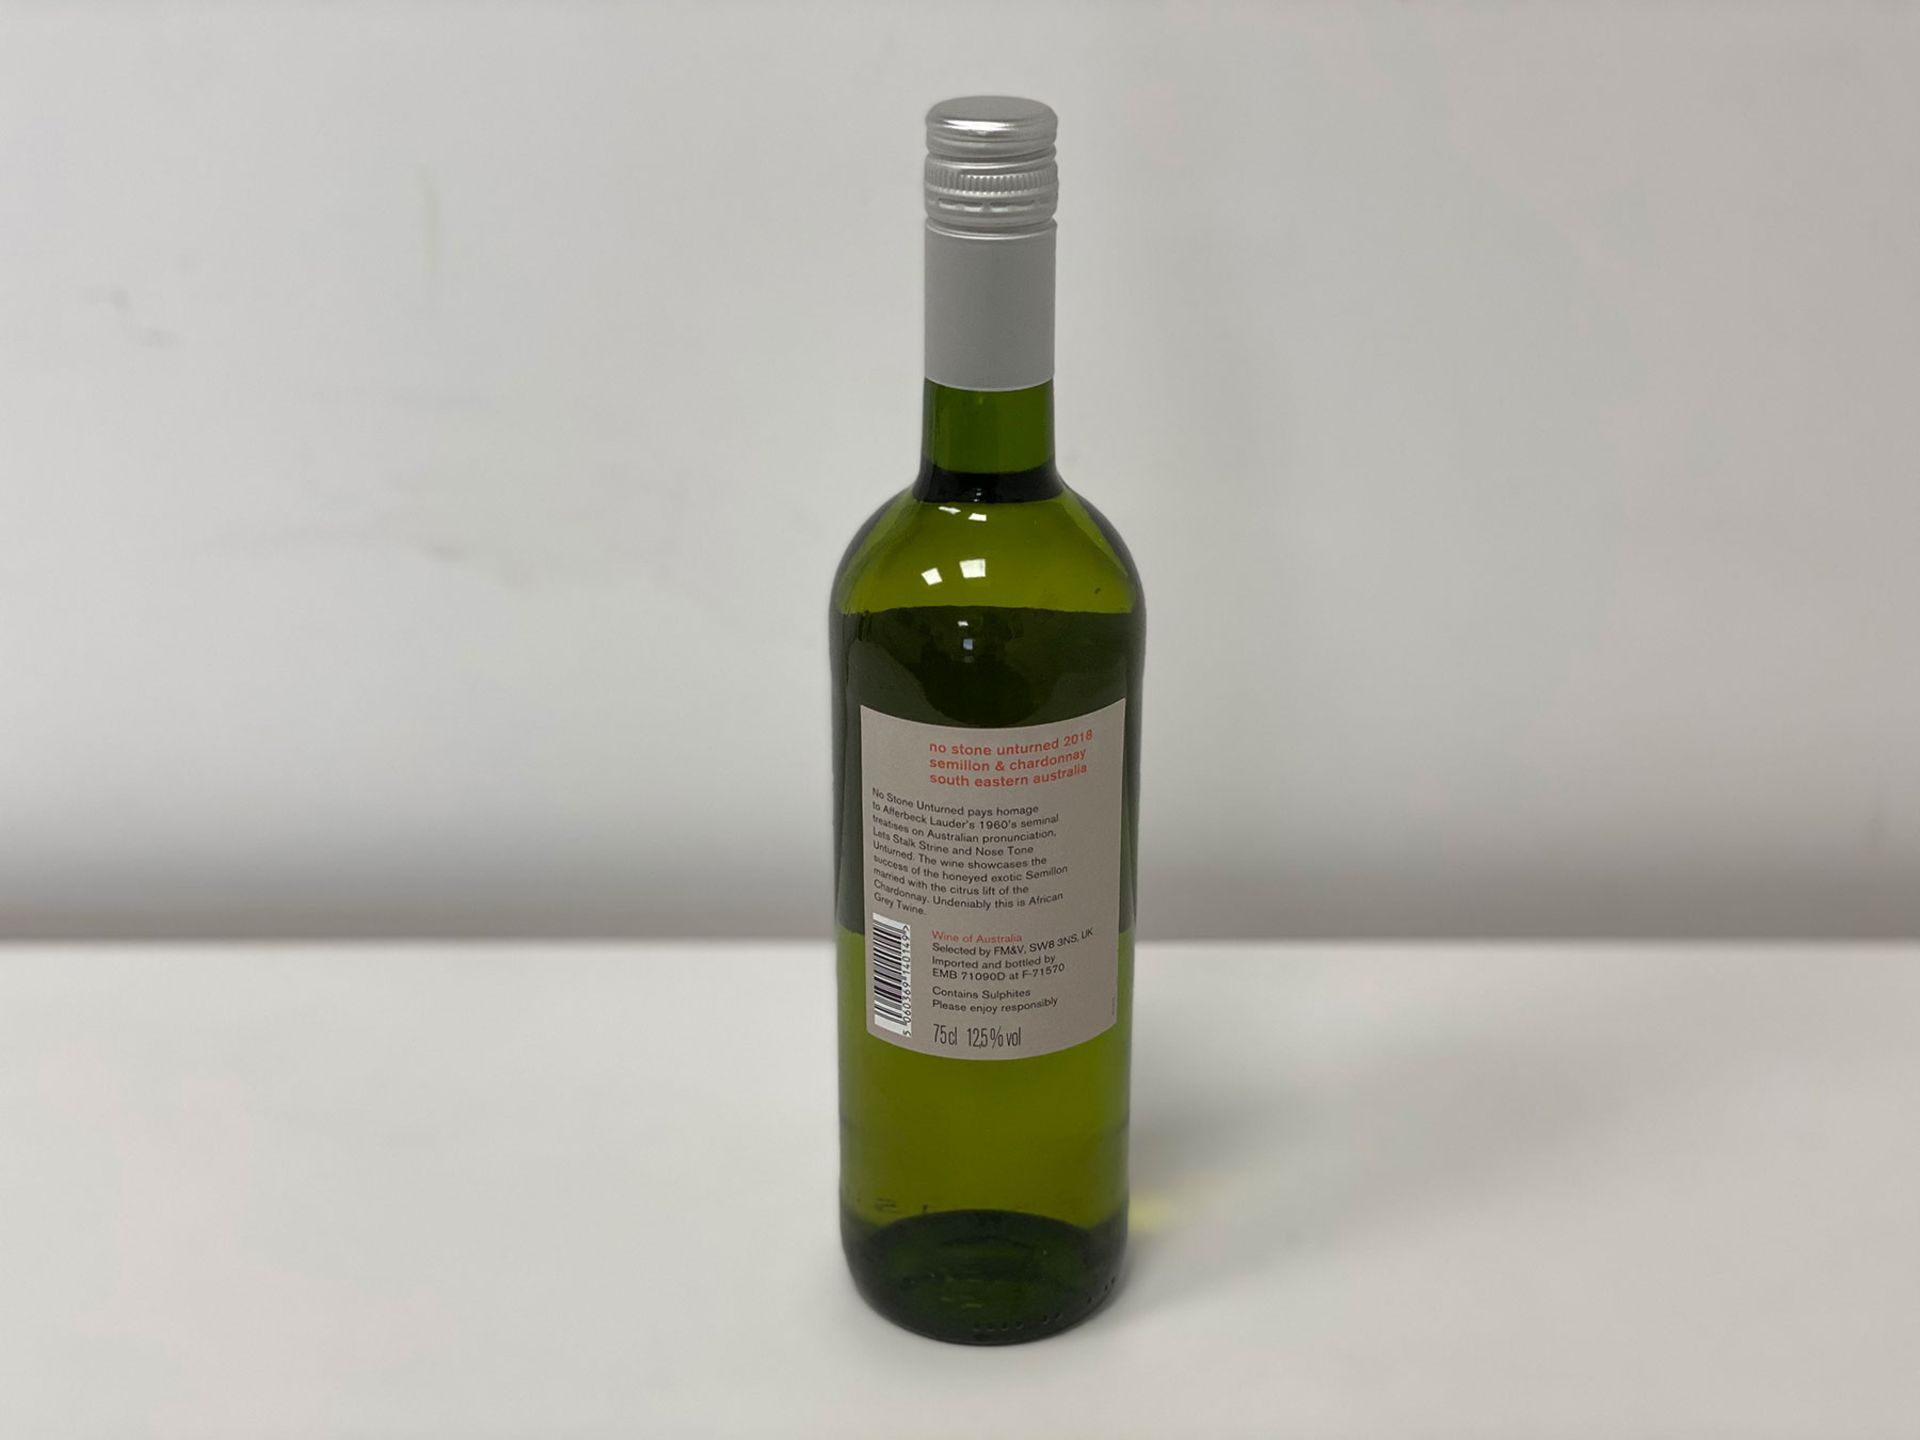 30 Bottles (5 Cases) Paul Sapin - No Stone Unturned - S√©millon and Chardonnay - Murray Darling - Image 2 of 2